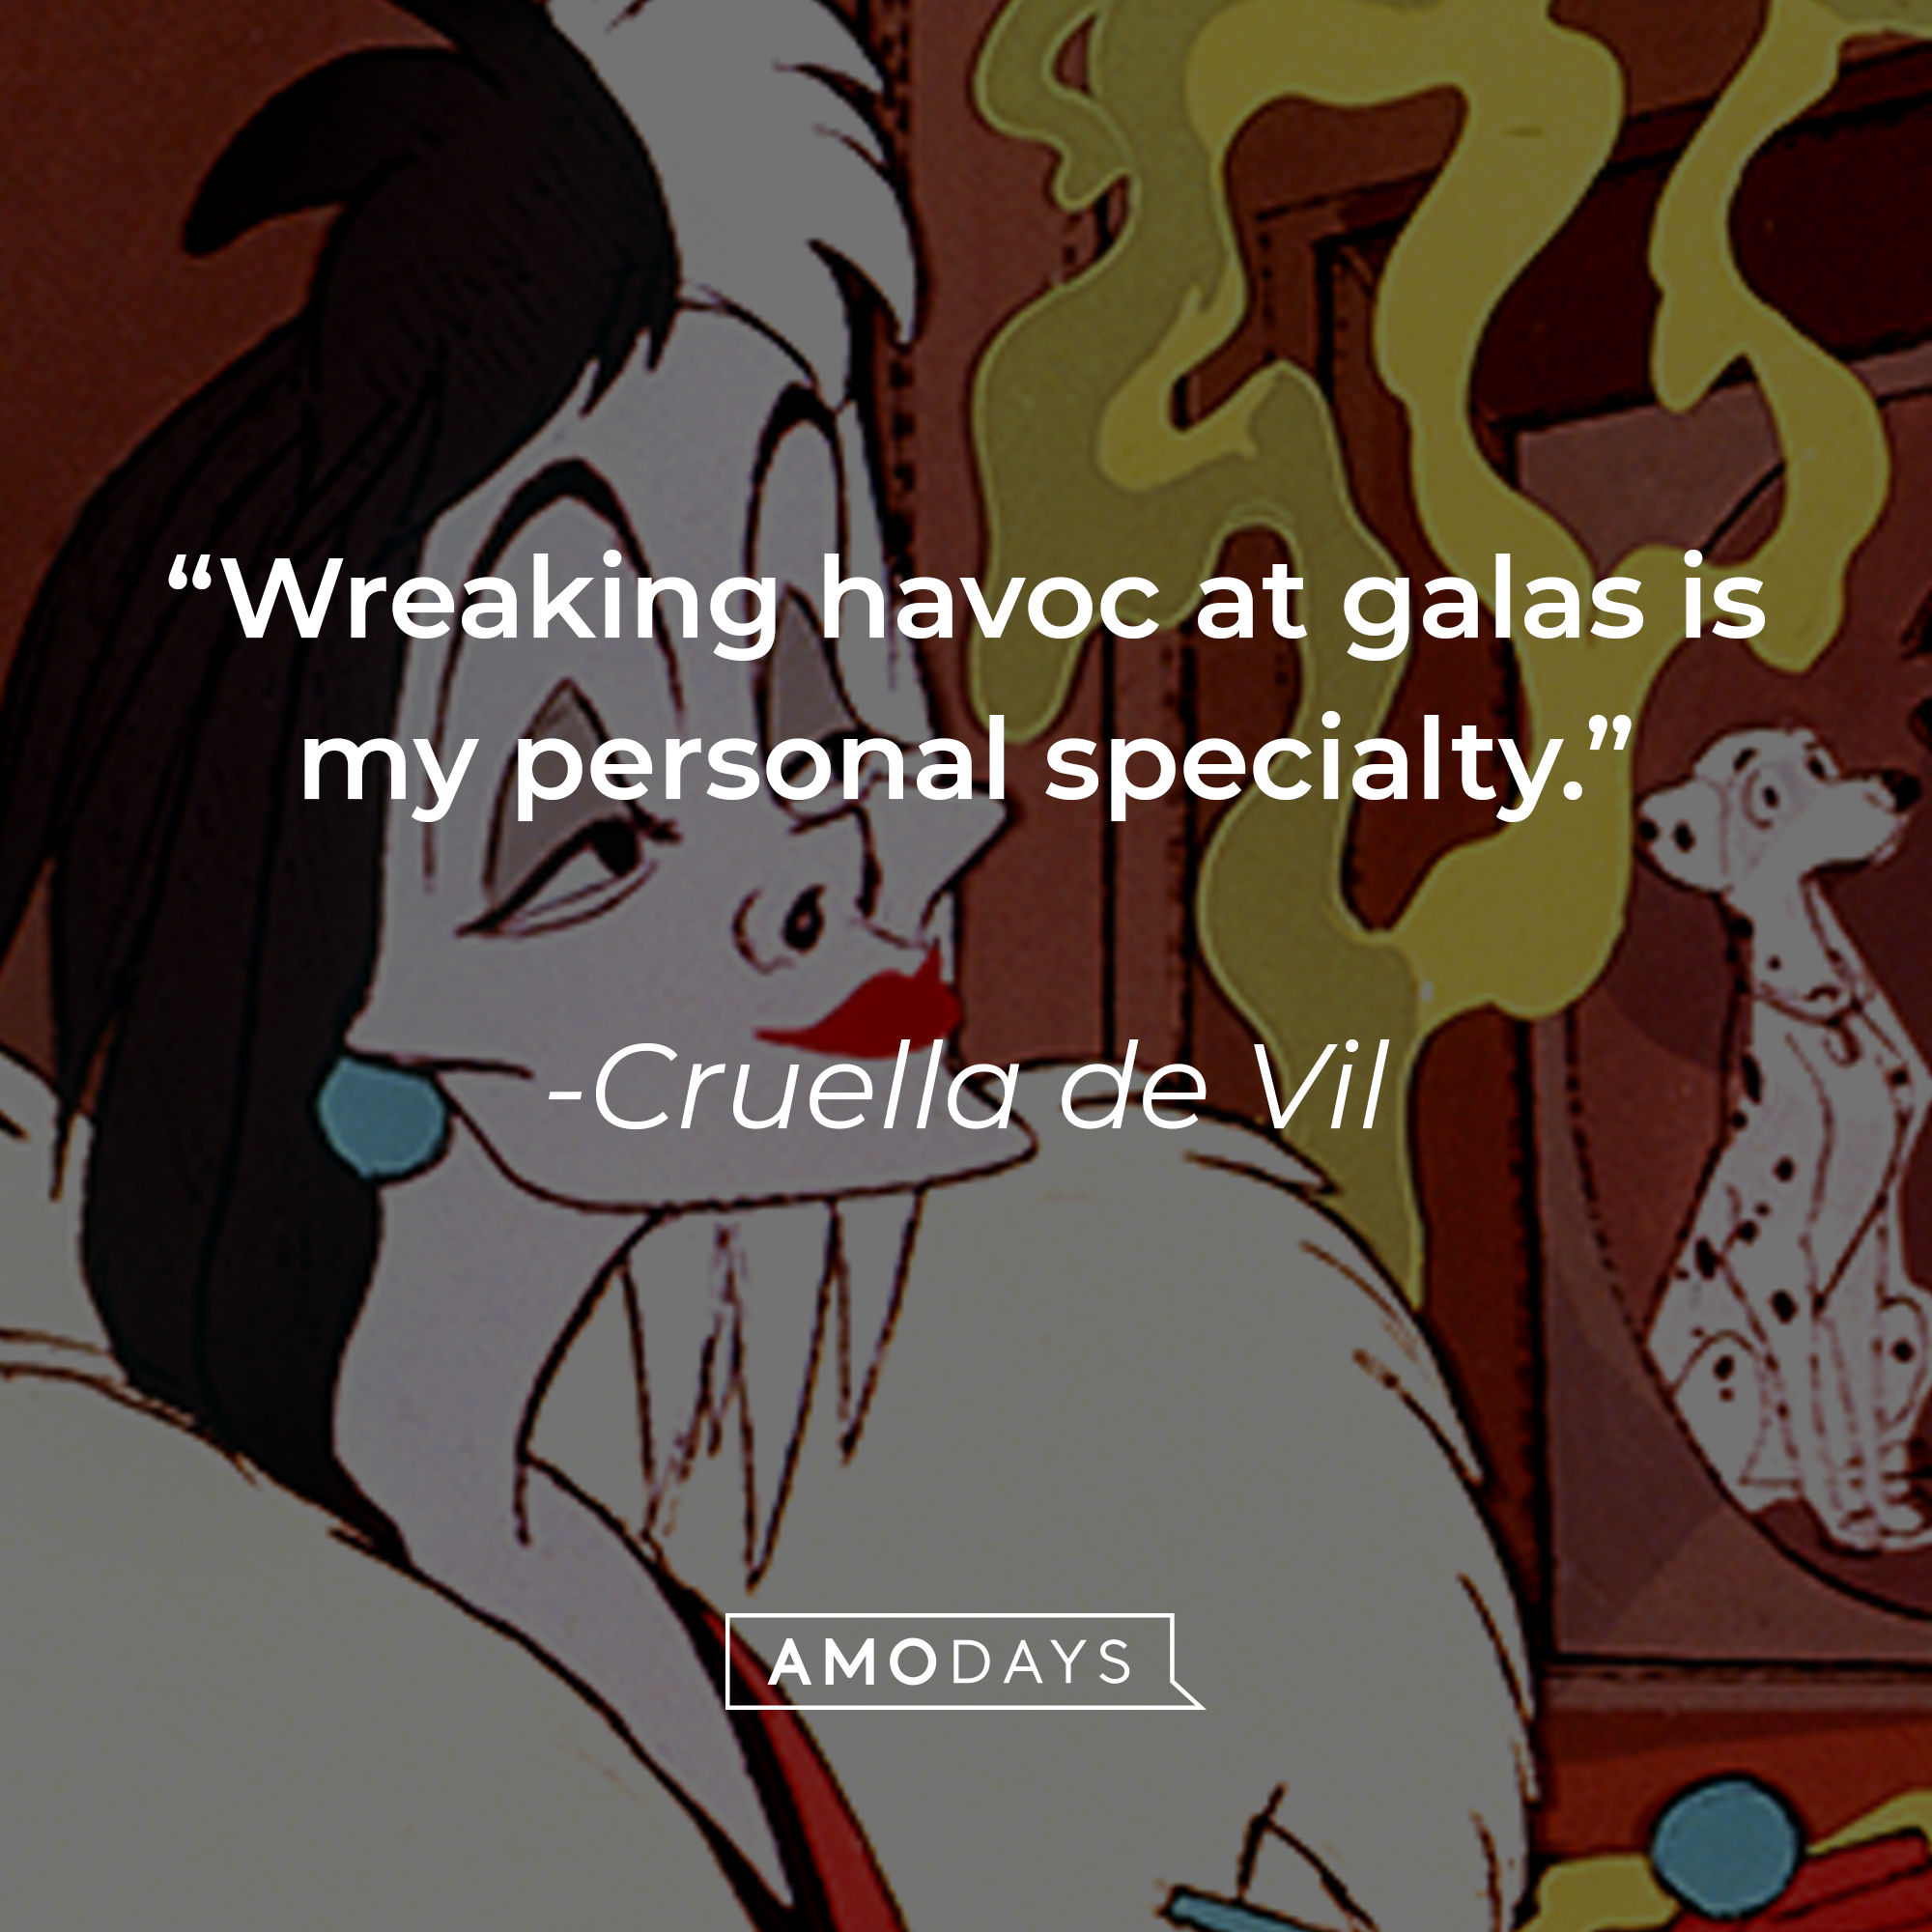 An image of the animated Cruella de Vil, with a quote from the same adapted character in the 2021 film “Cruella”: “Wreaking havoc at galas is my personal specialty.”  |  Source: Facebook.com/DisneyCruellaDeVil